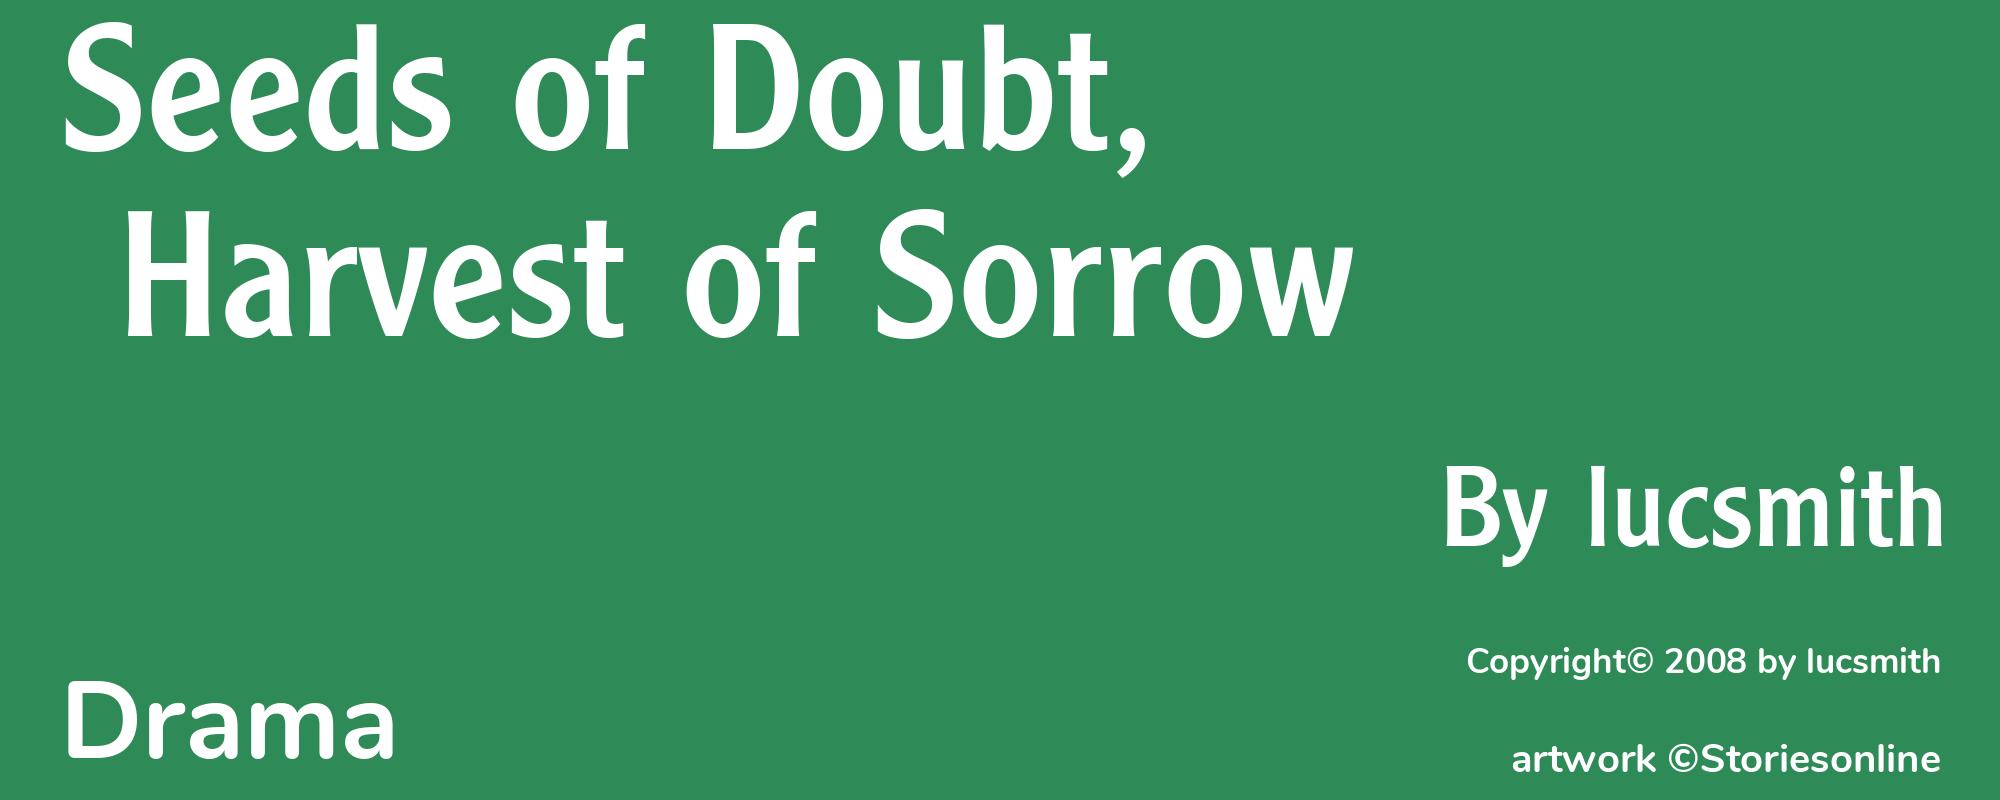 Seeds of Doubt, Harvest of Sorrow - Cover